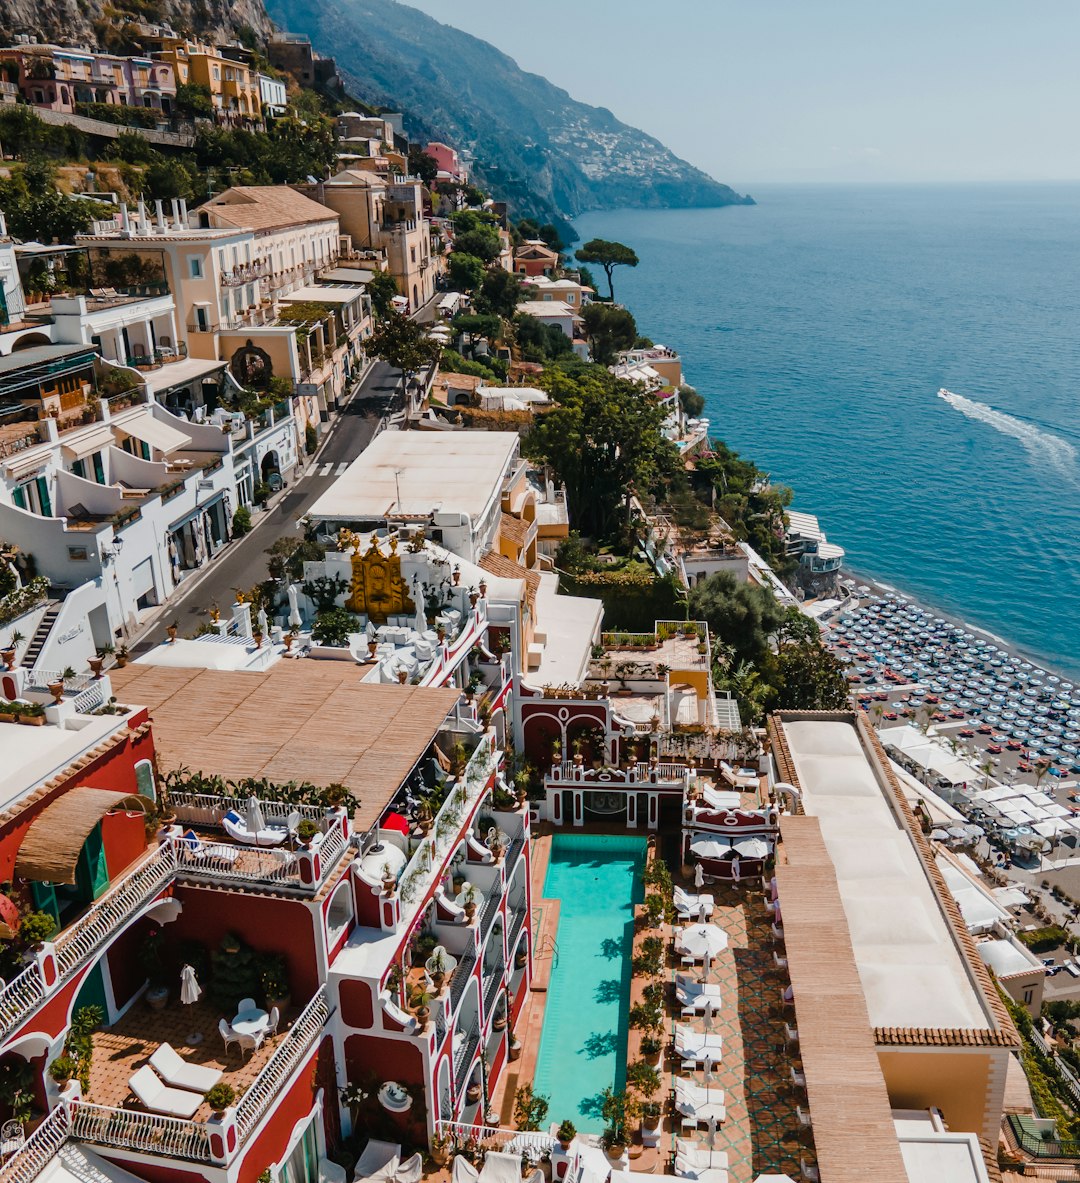 travelers stories about Resort in Positano, Italy